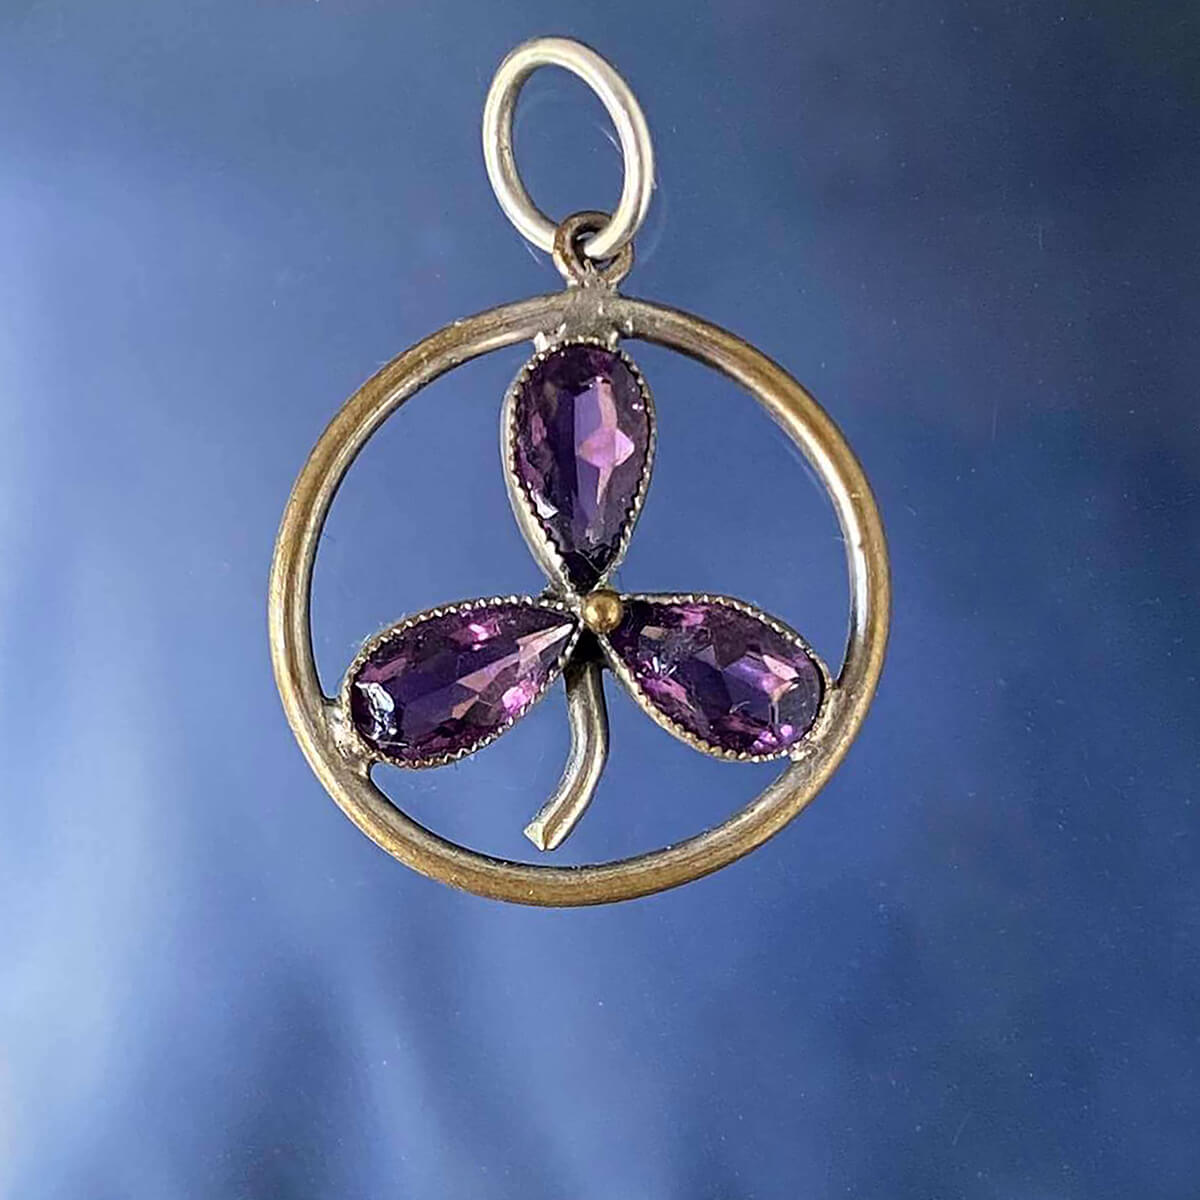 Purple clover leaf charm antique French amethyst gilded silver pendant from Charmarama